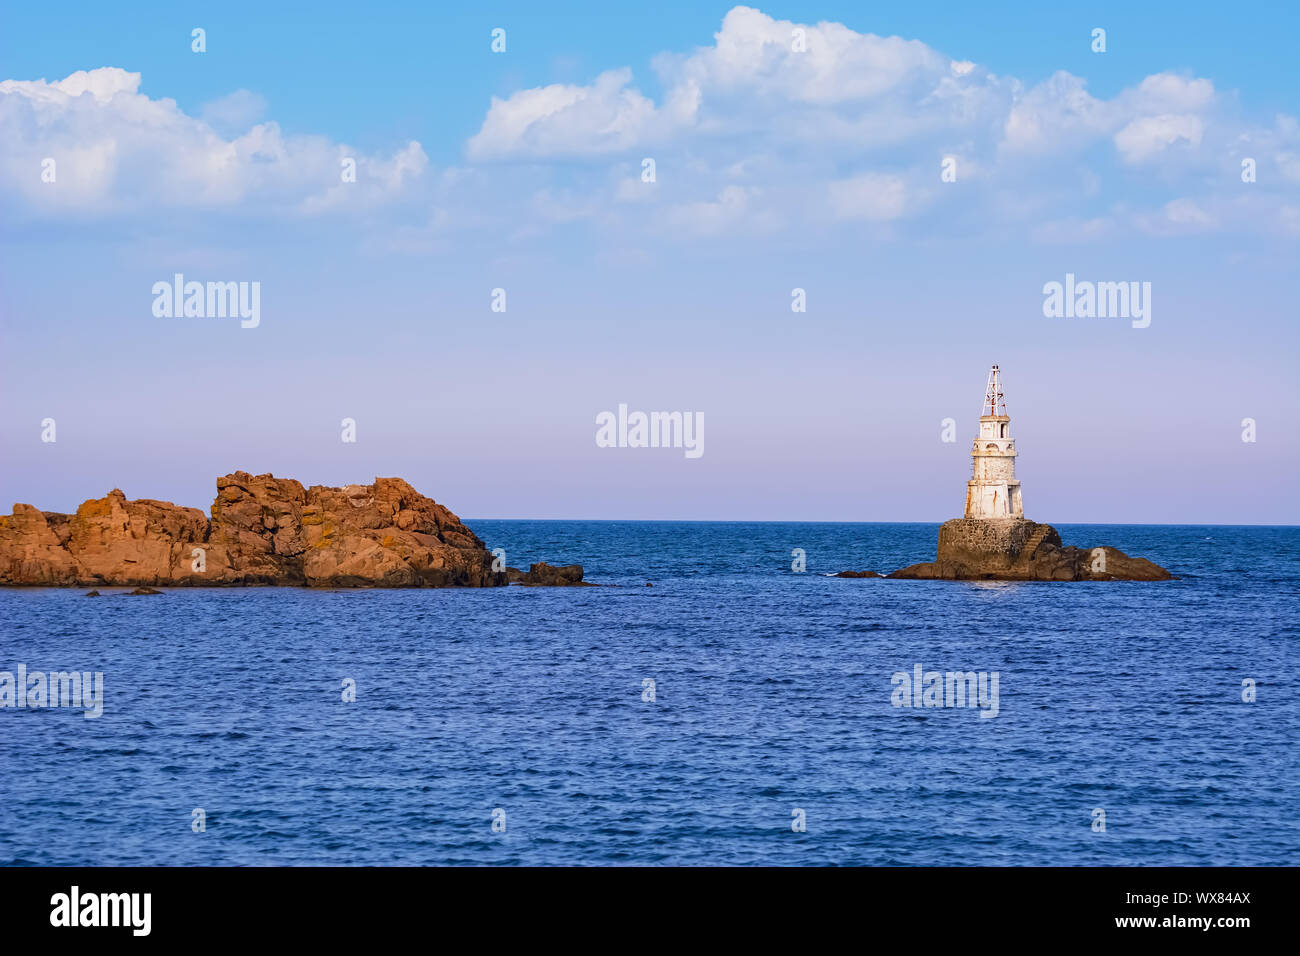 Small Lighthouse in the Sea Stock Photo